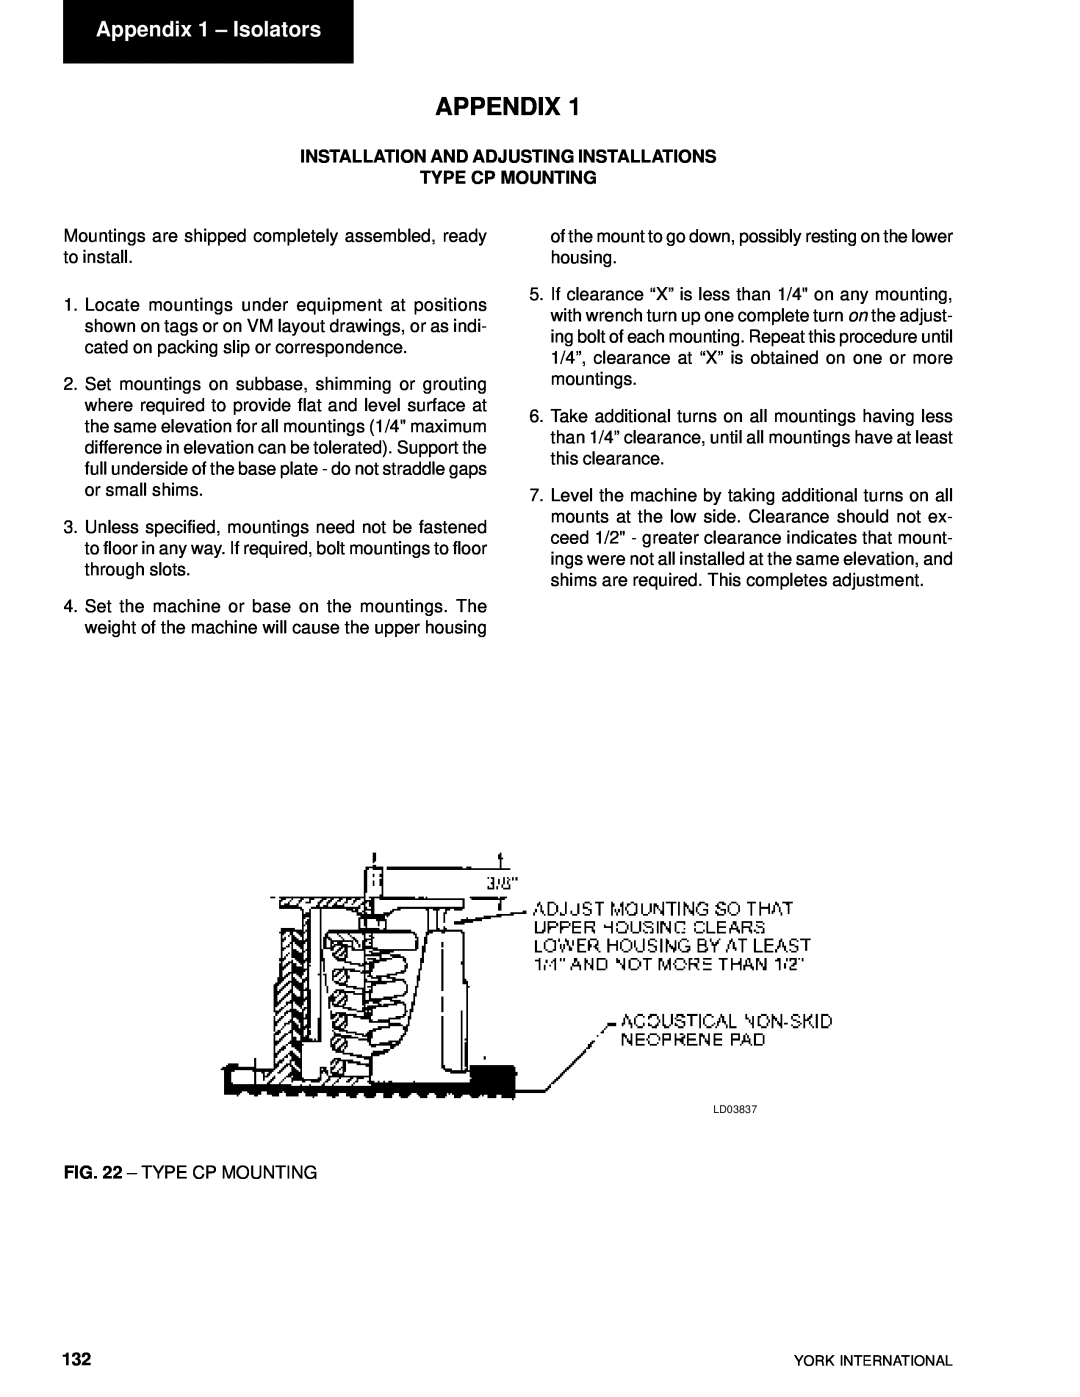 York YCAL0014SC, YCAL0080SC manual Appendix 1 – Isolators, Installation And Adjusting Installations, Type Cp Mounting 